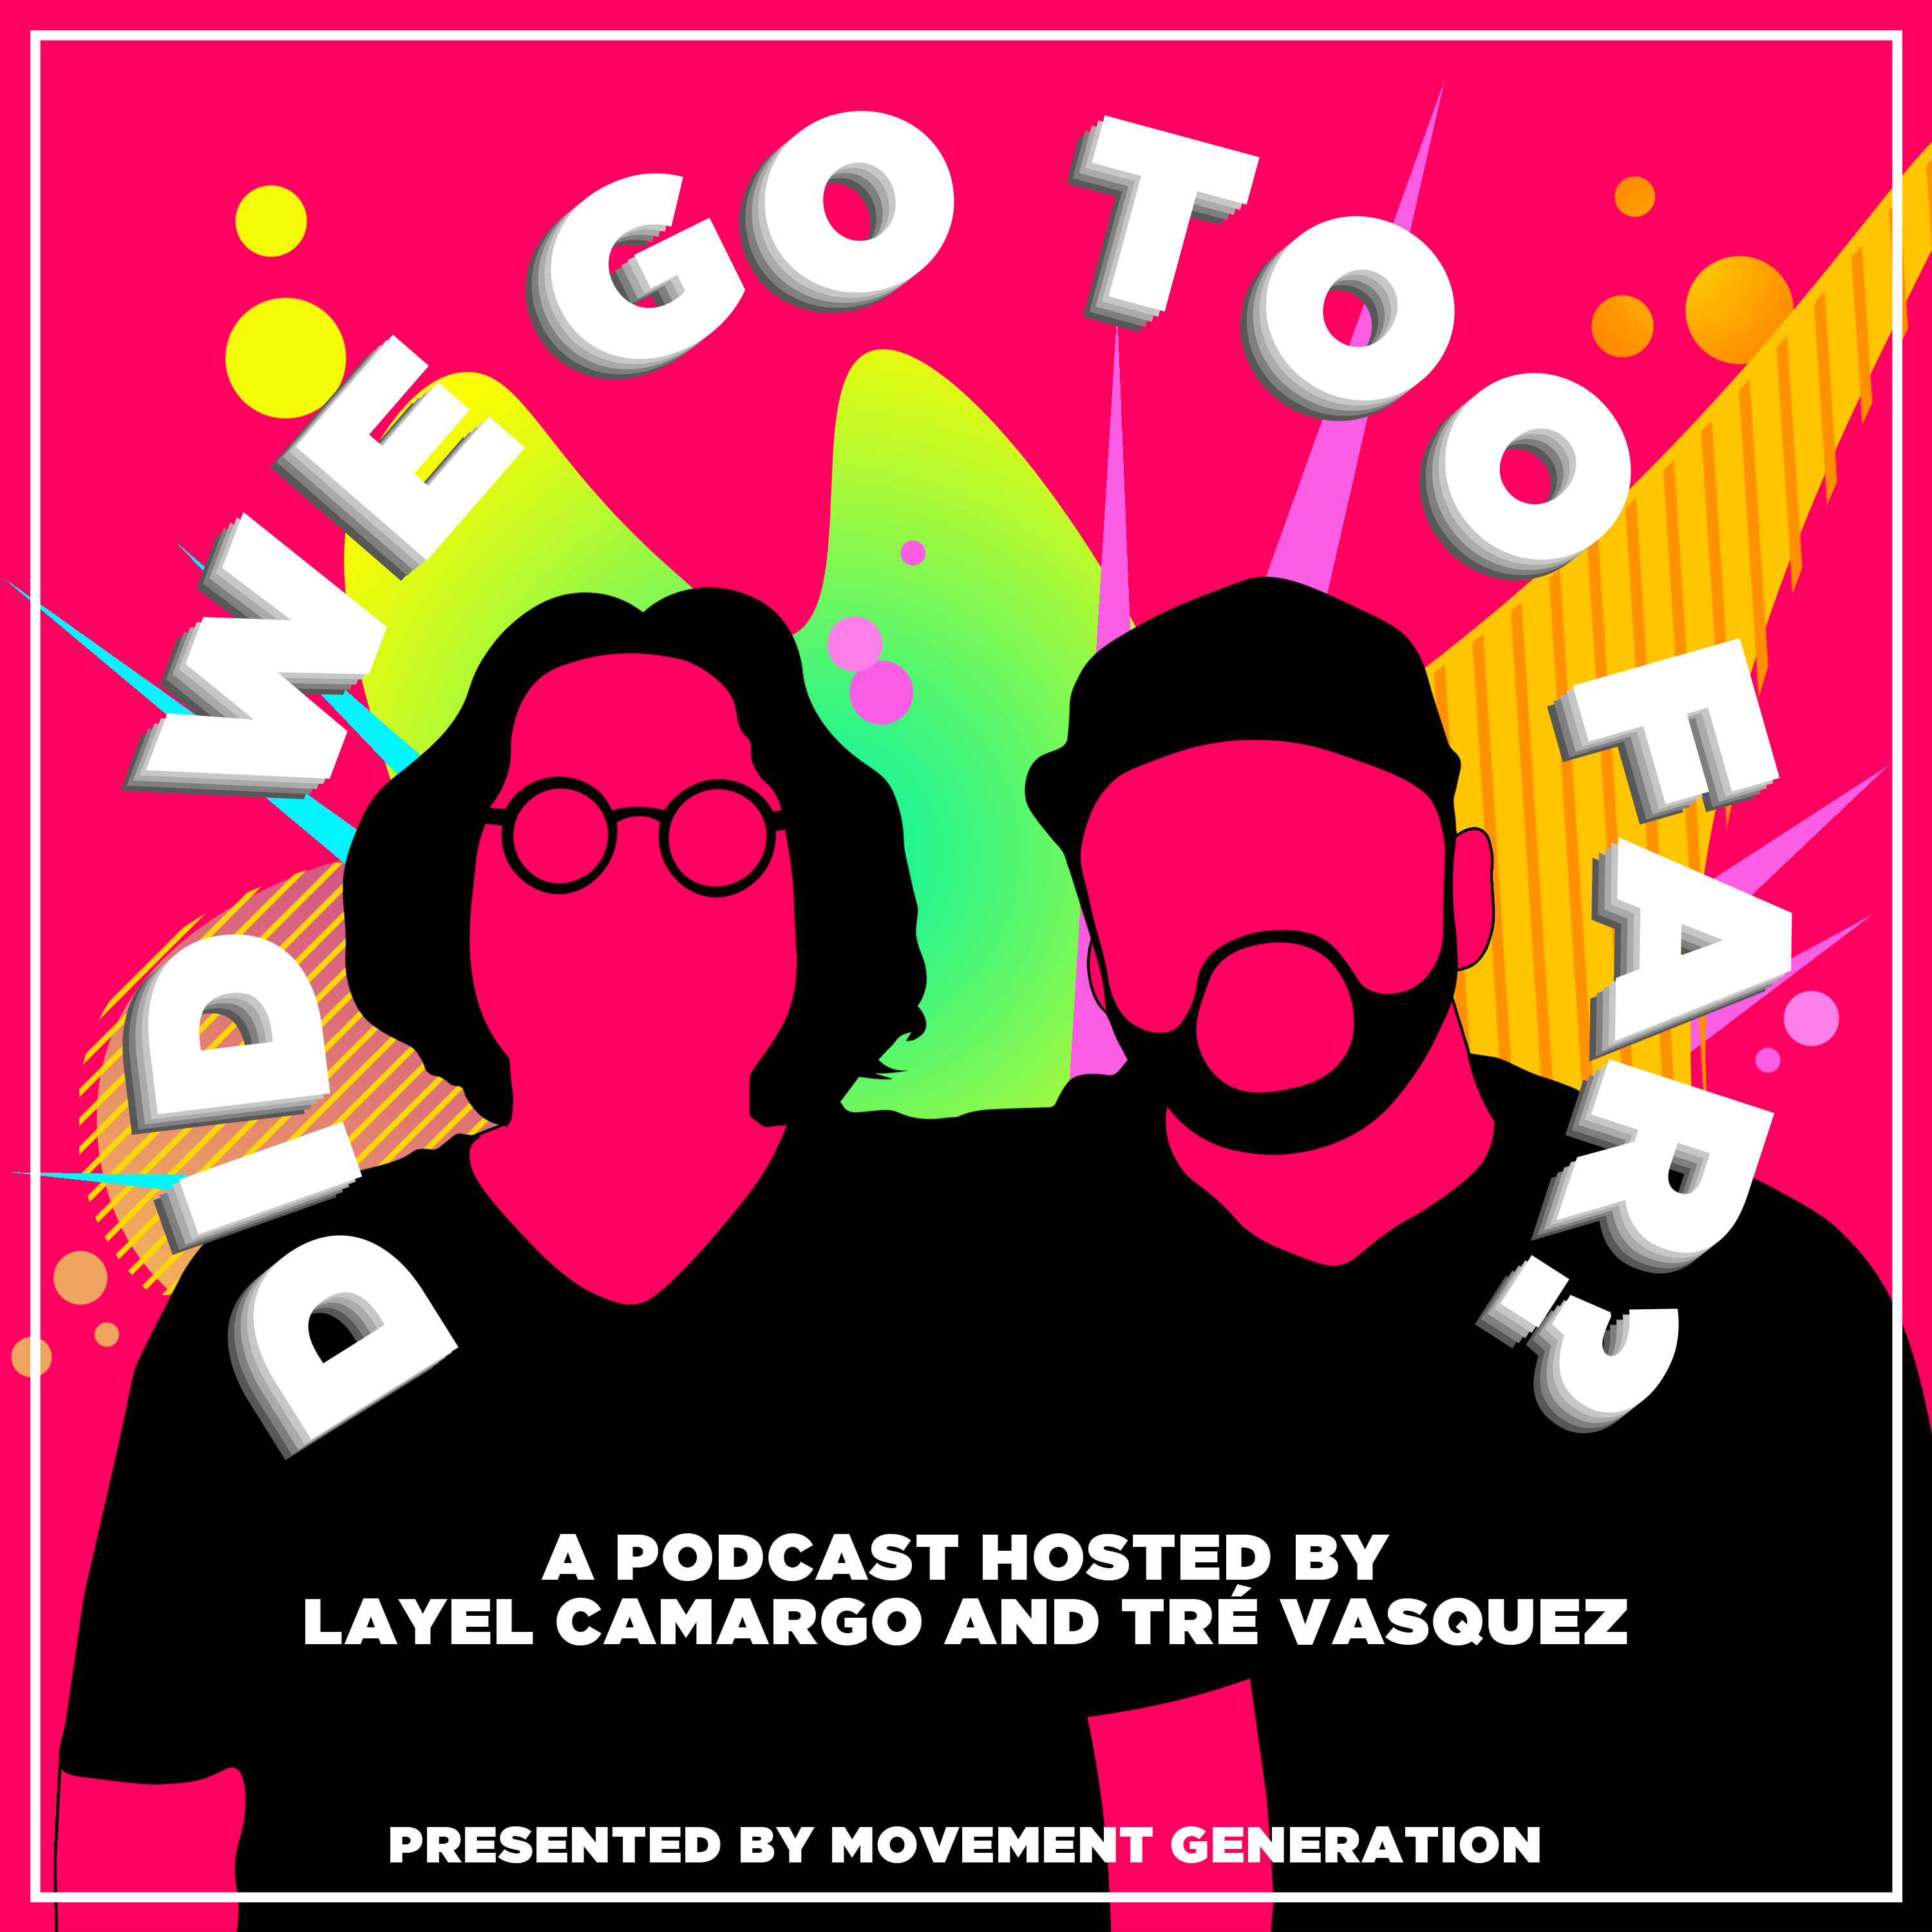 Did We Go Too Far? Podcast